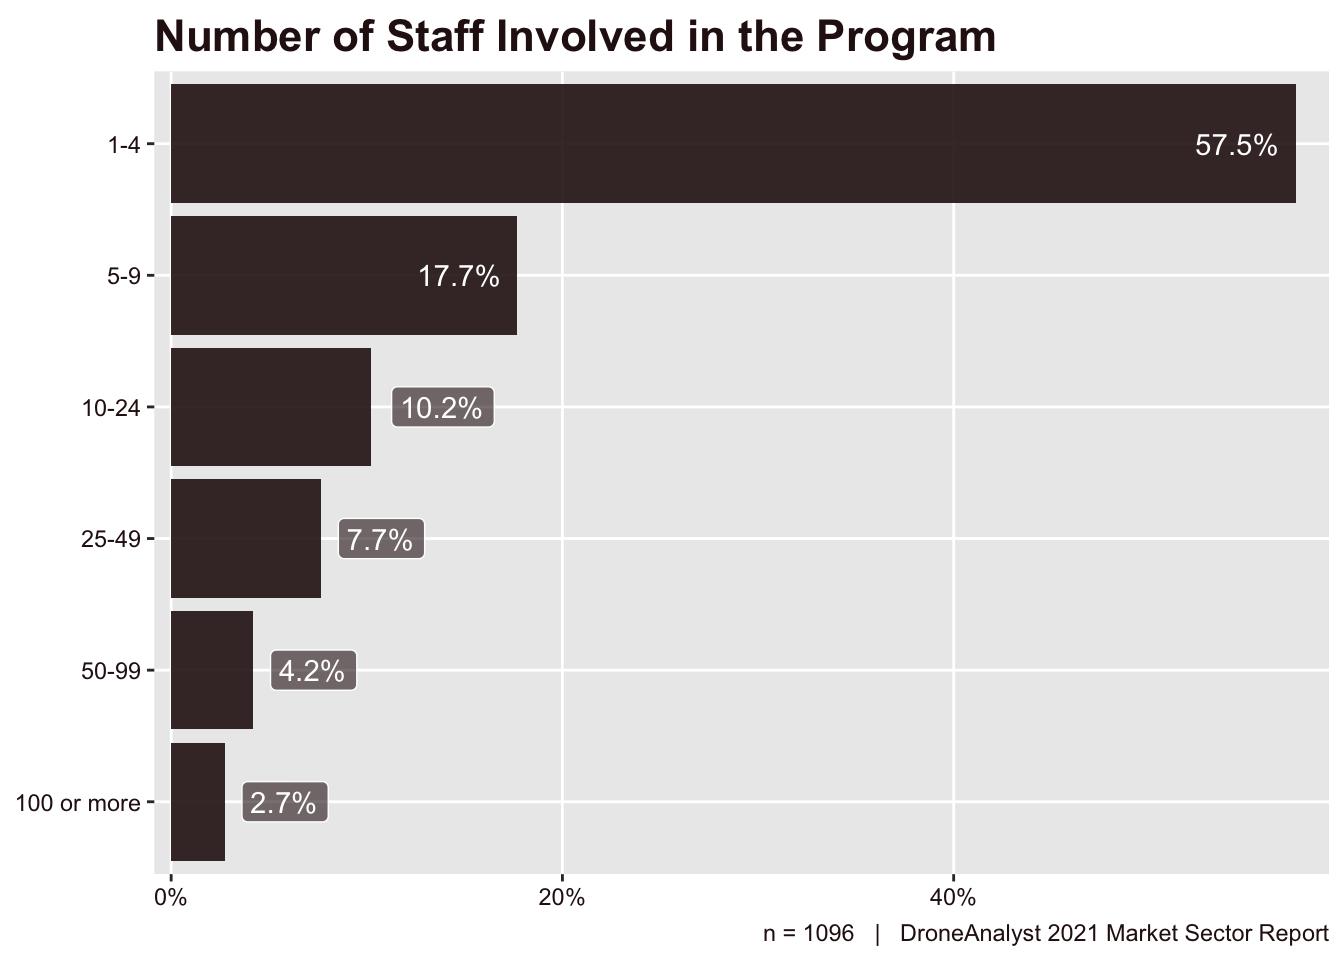 Number of Staff Involved in the Program